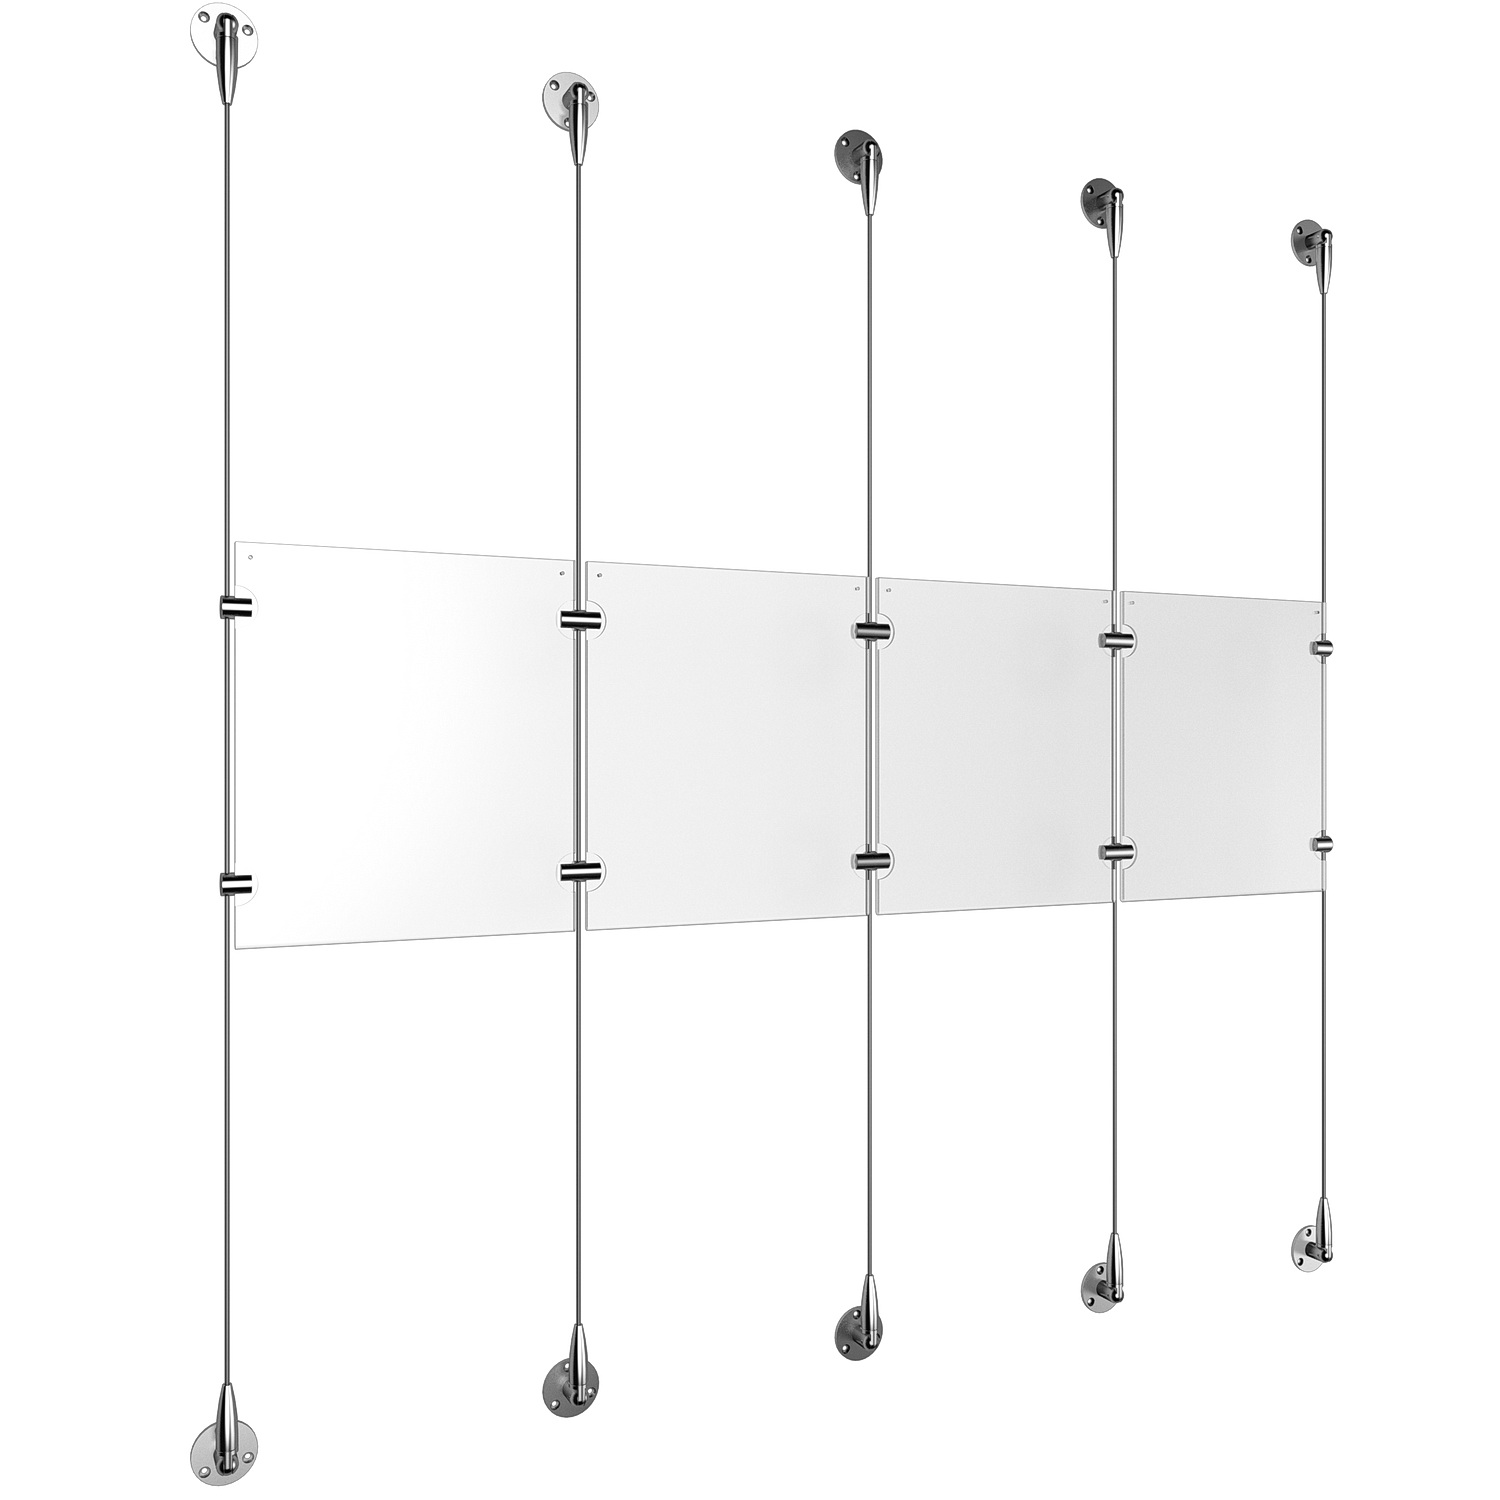 (4) 8-1/2'' Width x 11'' Height Clear Acrylic Frame & (5) Stainless Steel Satin Brushed Adjustable Angle Signature 1/8'' Cable Systems with (4) Single-Sided Panel Grippers (6) Double-Sided Panel Grippers